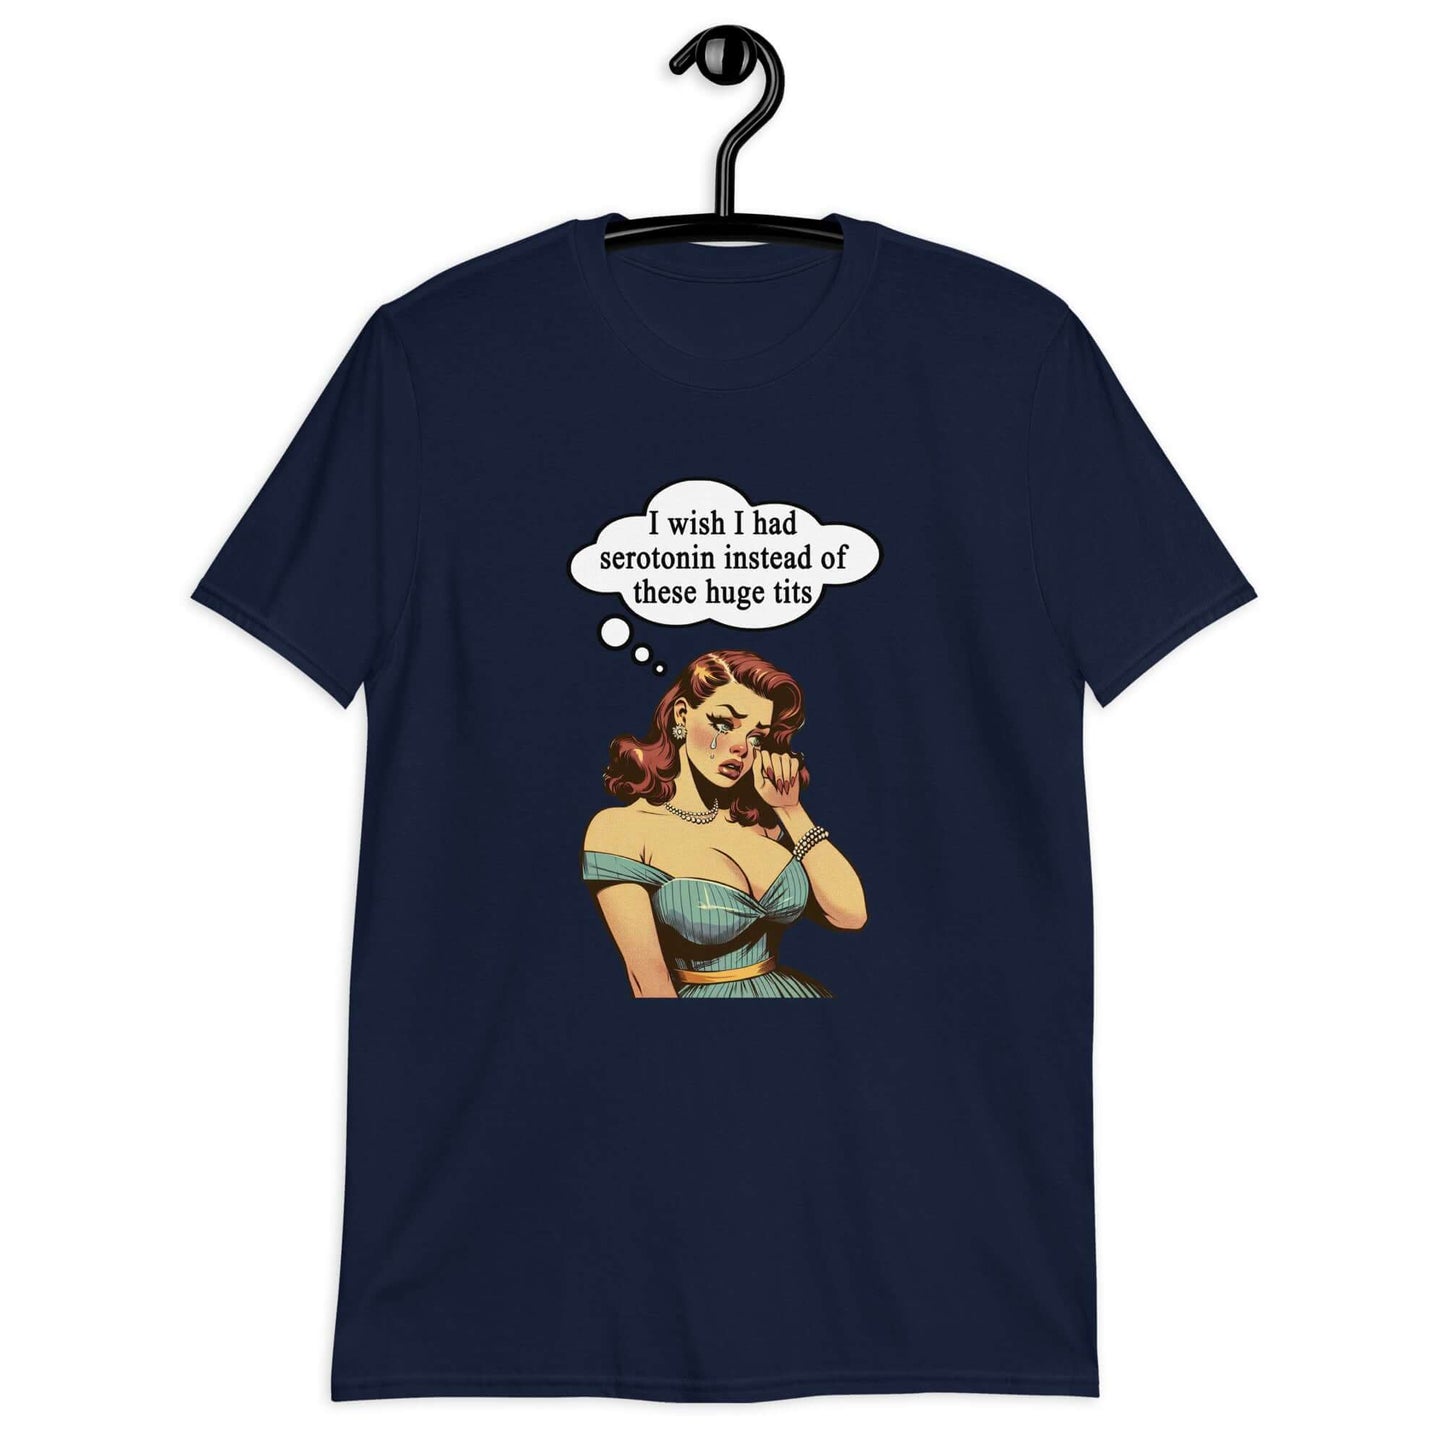 Navy blue t-shirt with an image of a busty pin-up lady with thought bubble that says I wish I had serotonin instead of these huge tits printed on the front.